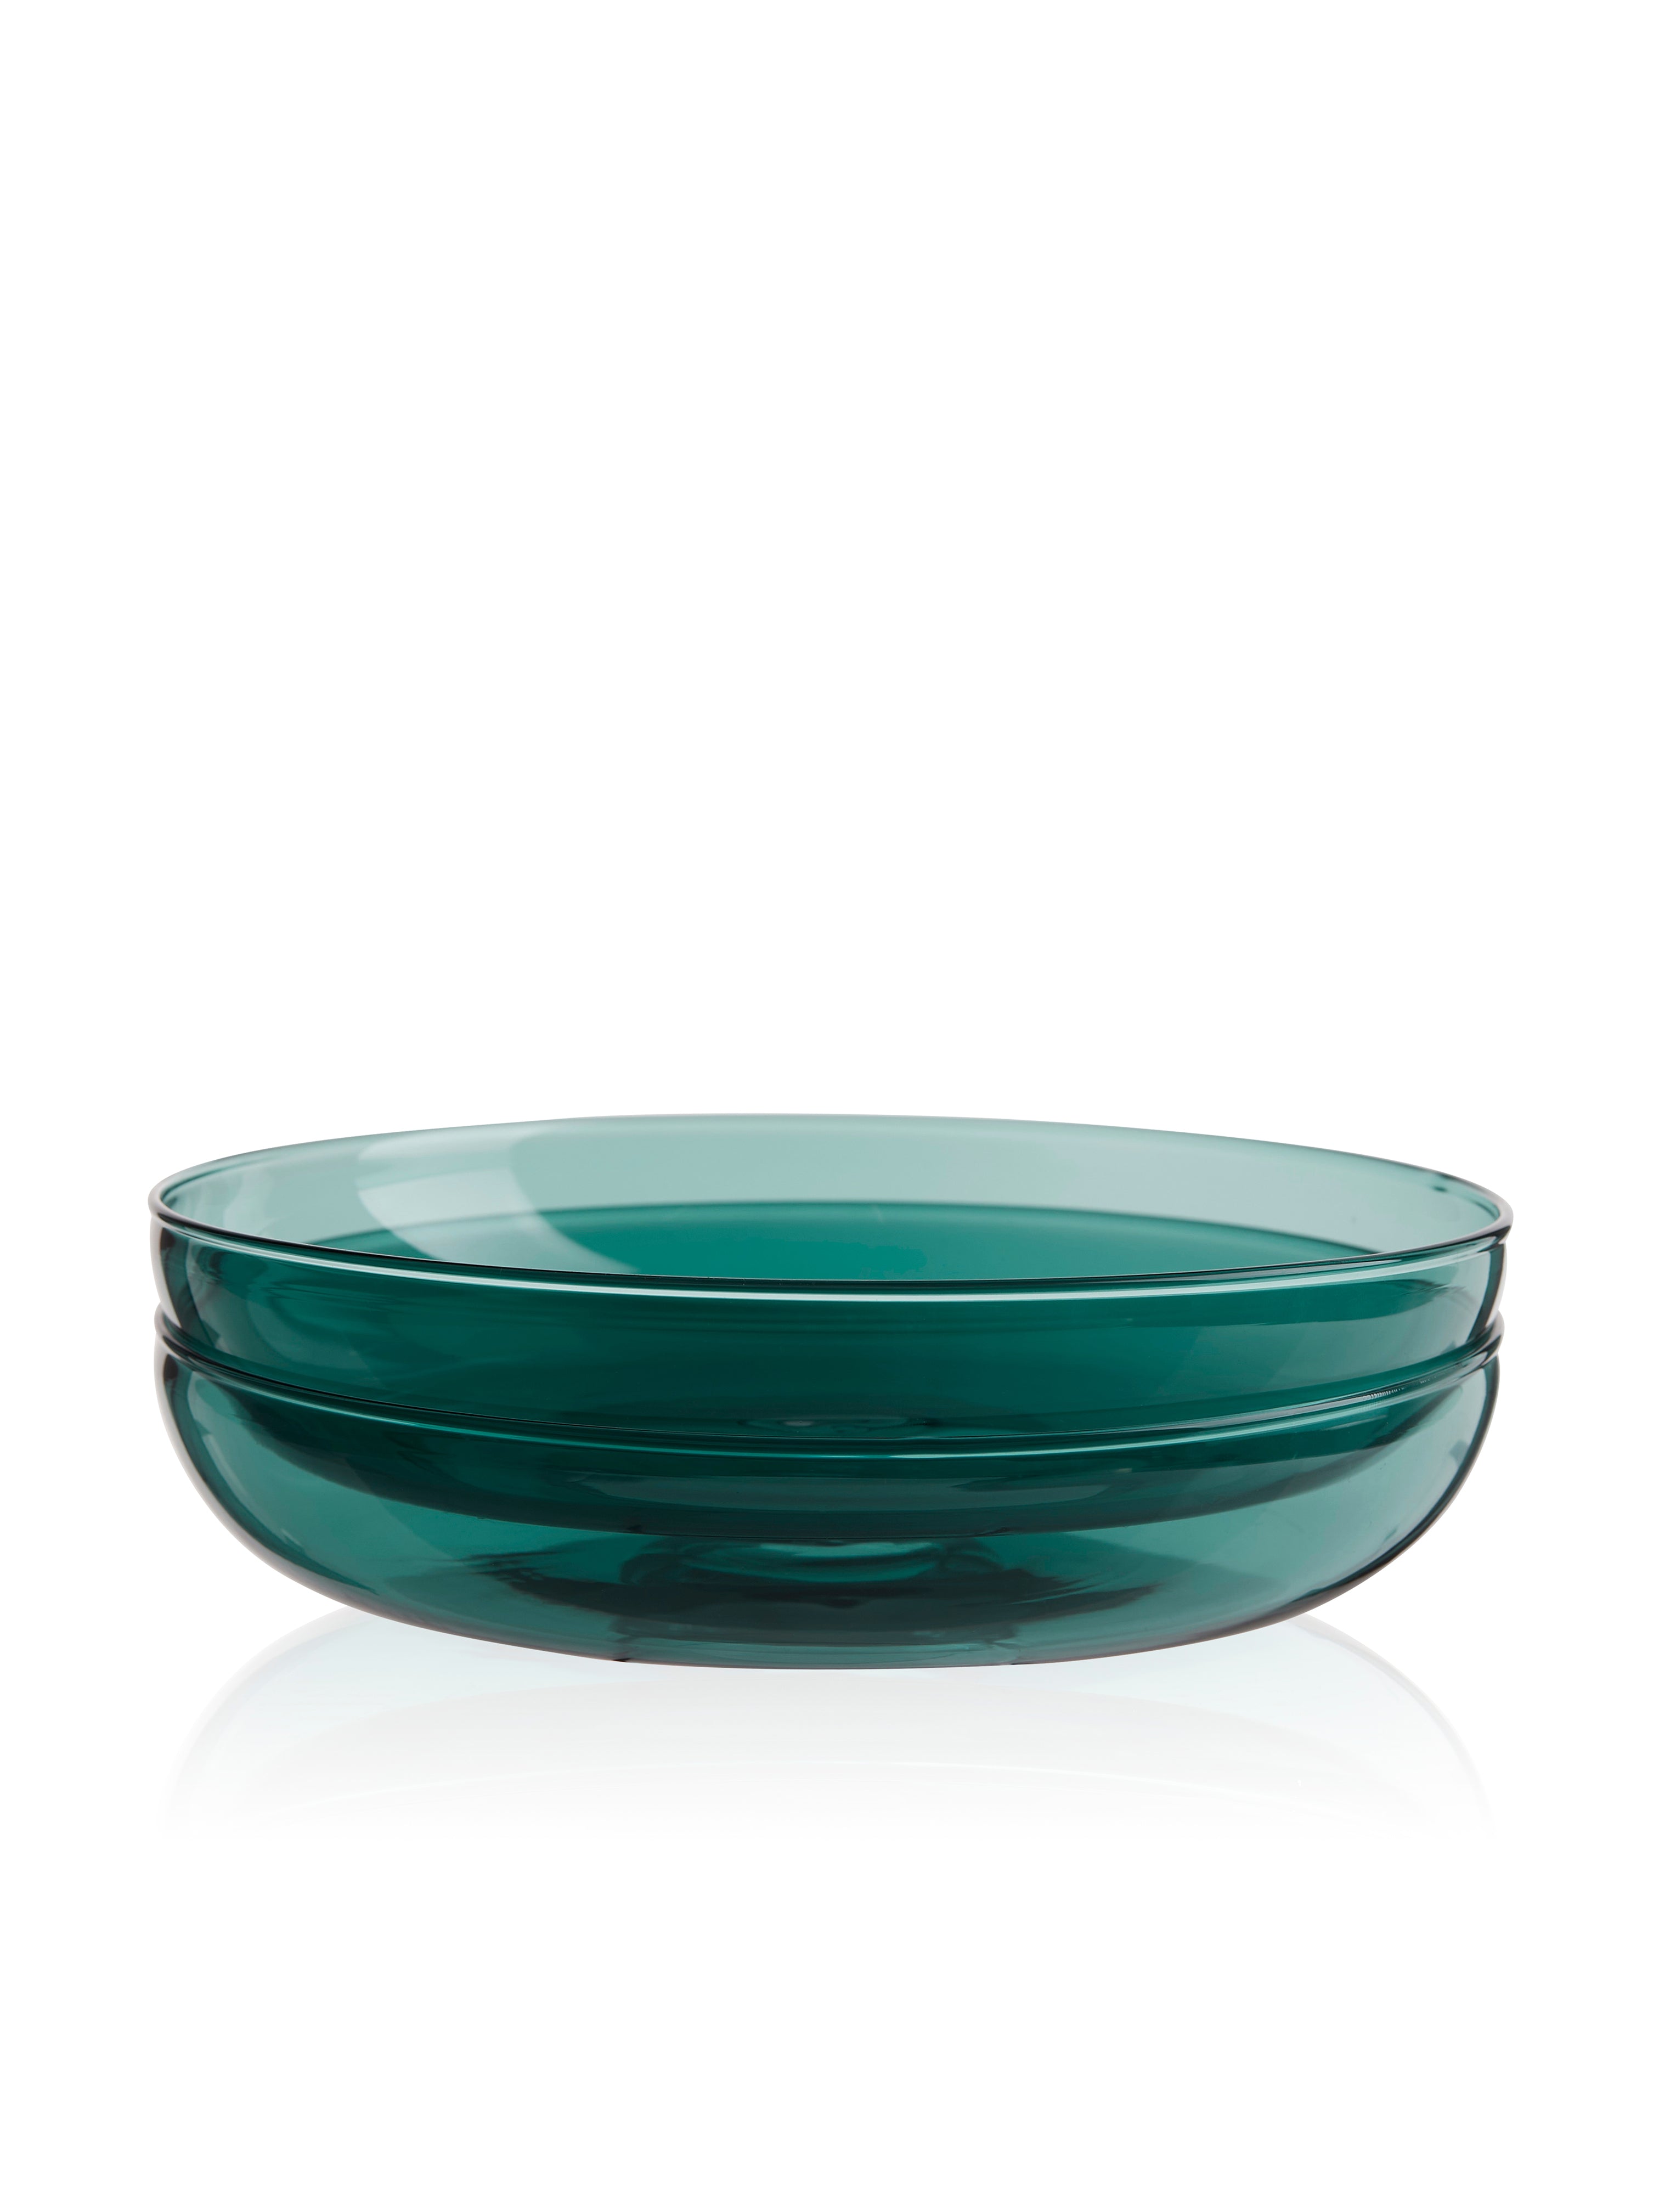 TEAL GLASS PLATES